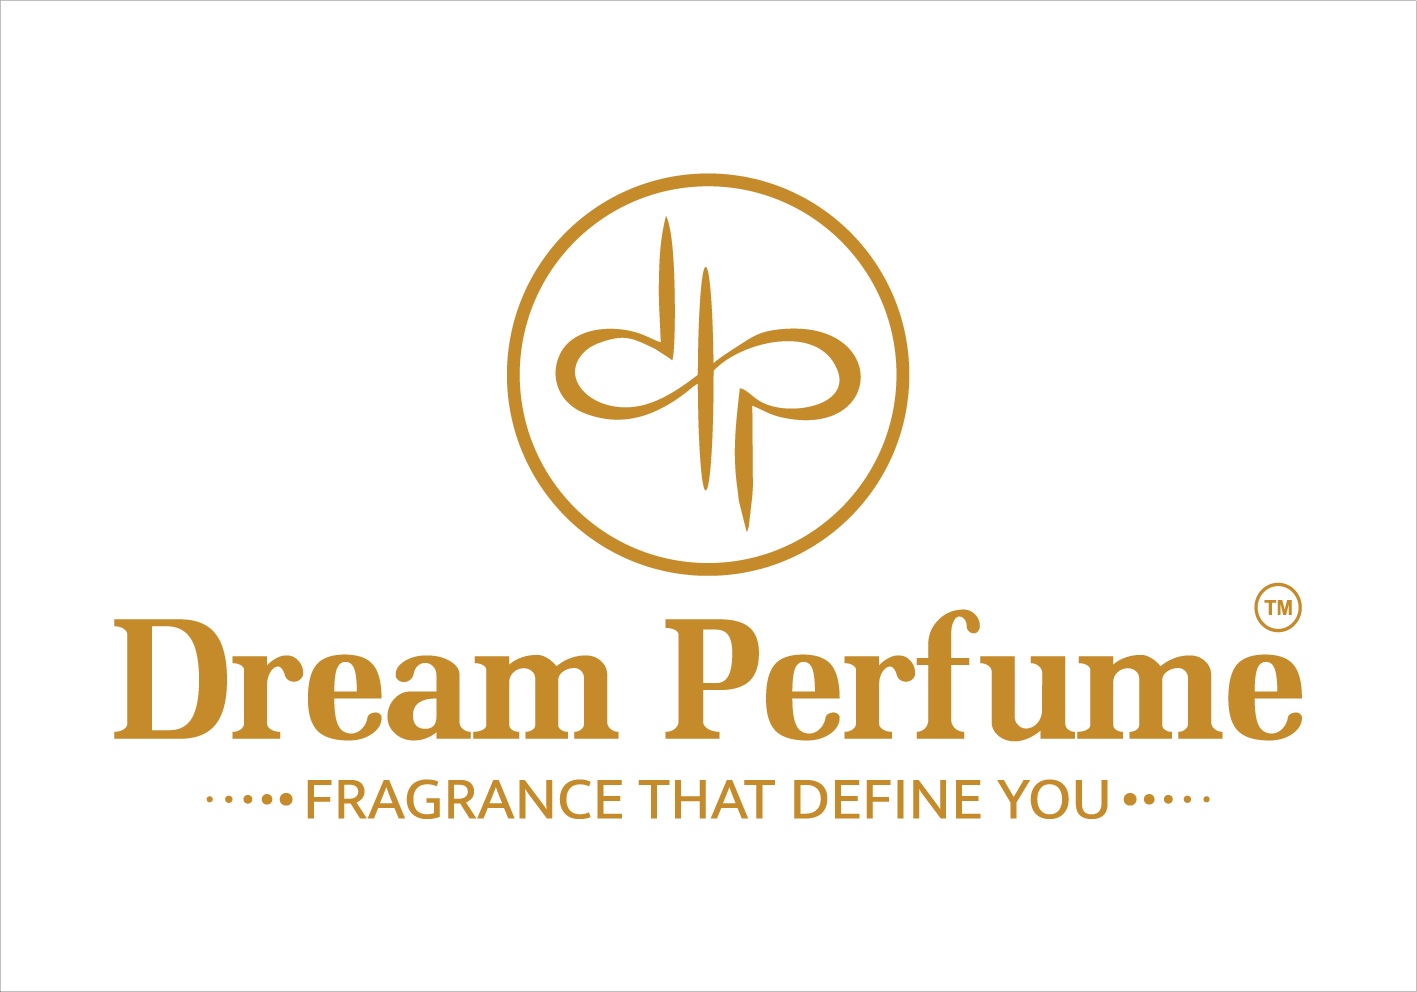 Dream of India Arts&amp;Scents perfume - a fragrance for women and men